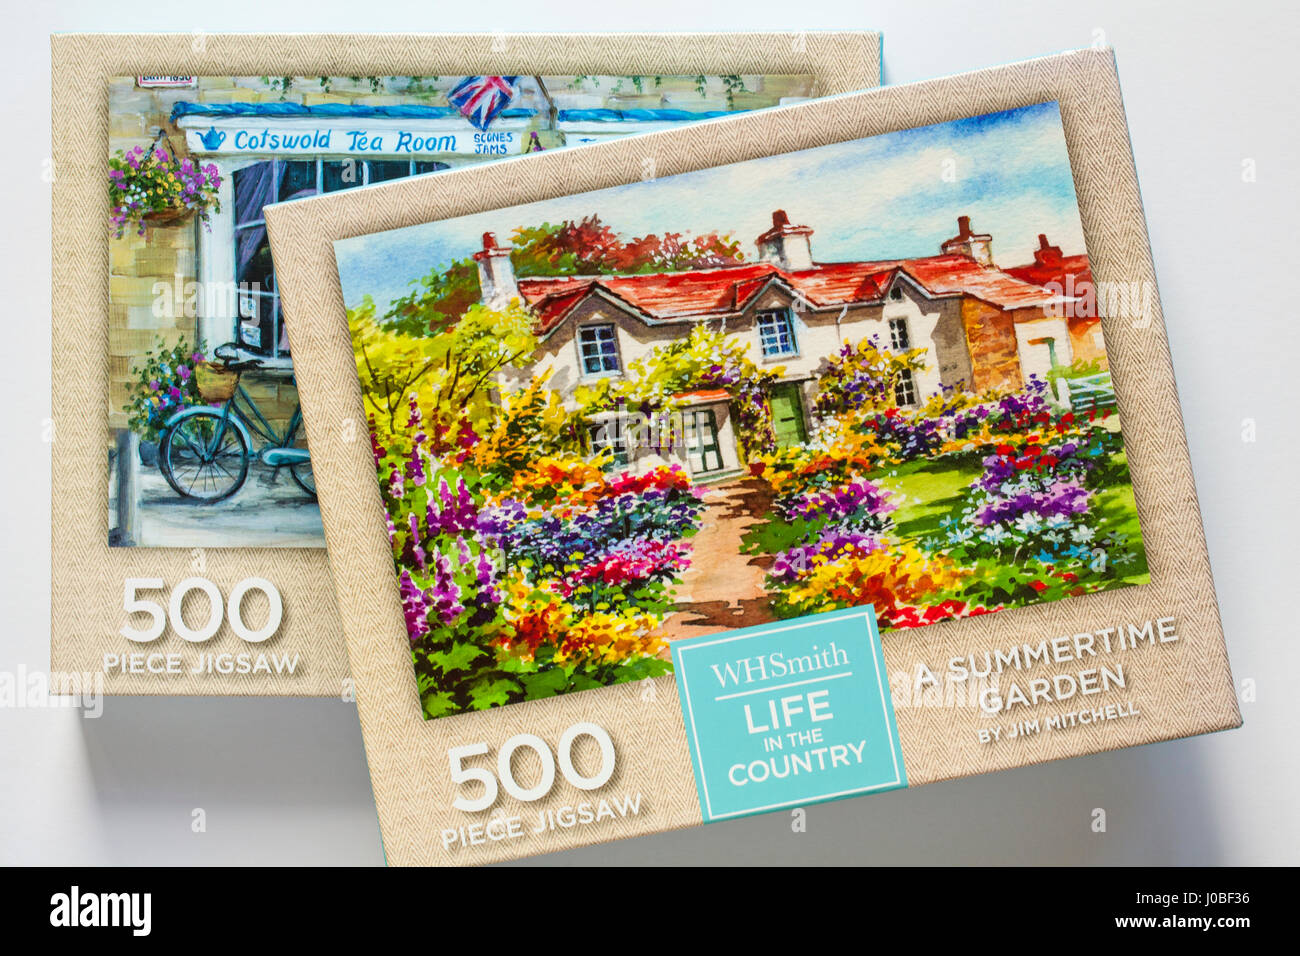 WHSmith Life In The Country The Platform 500 Piece Jigsaw Puzzle 